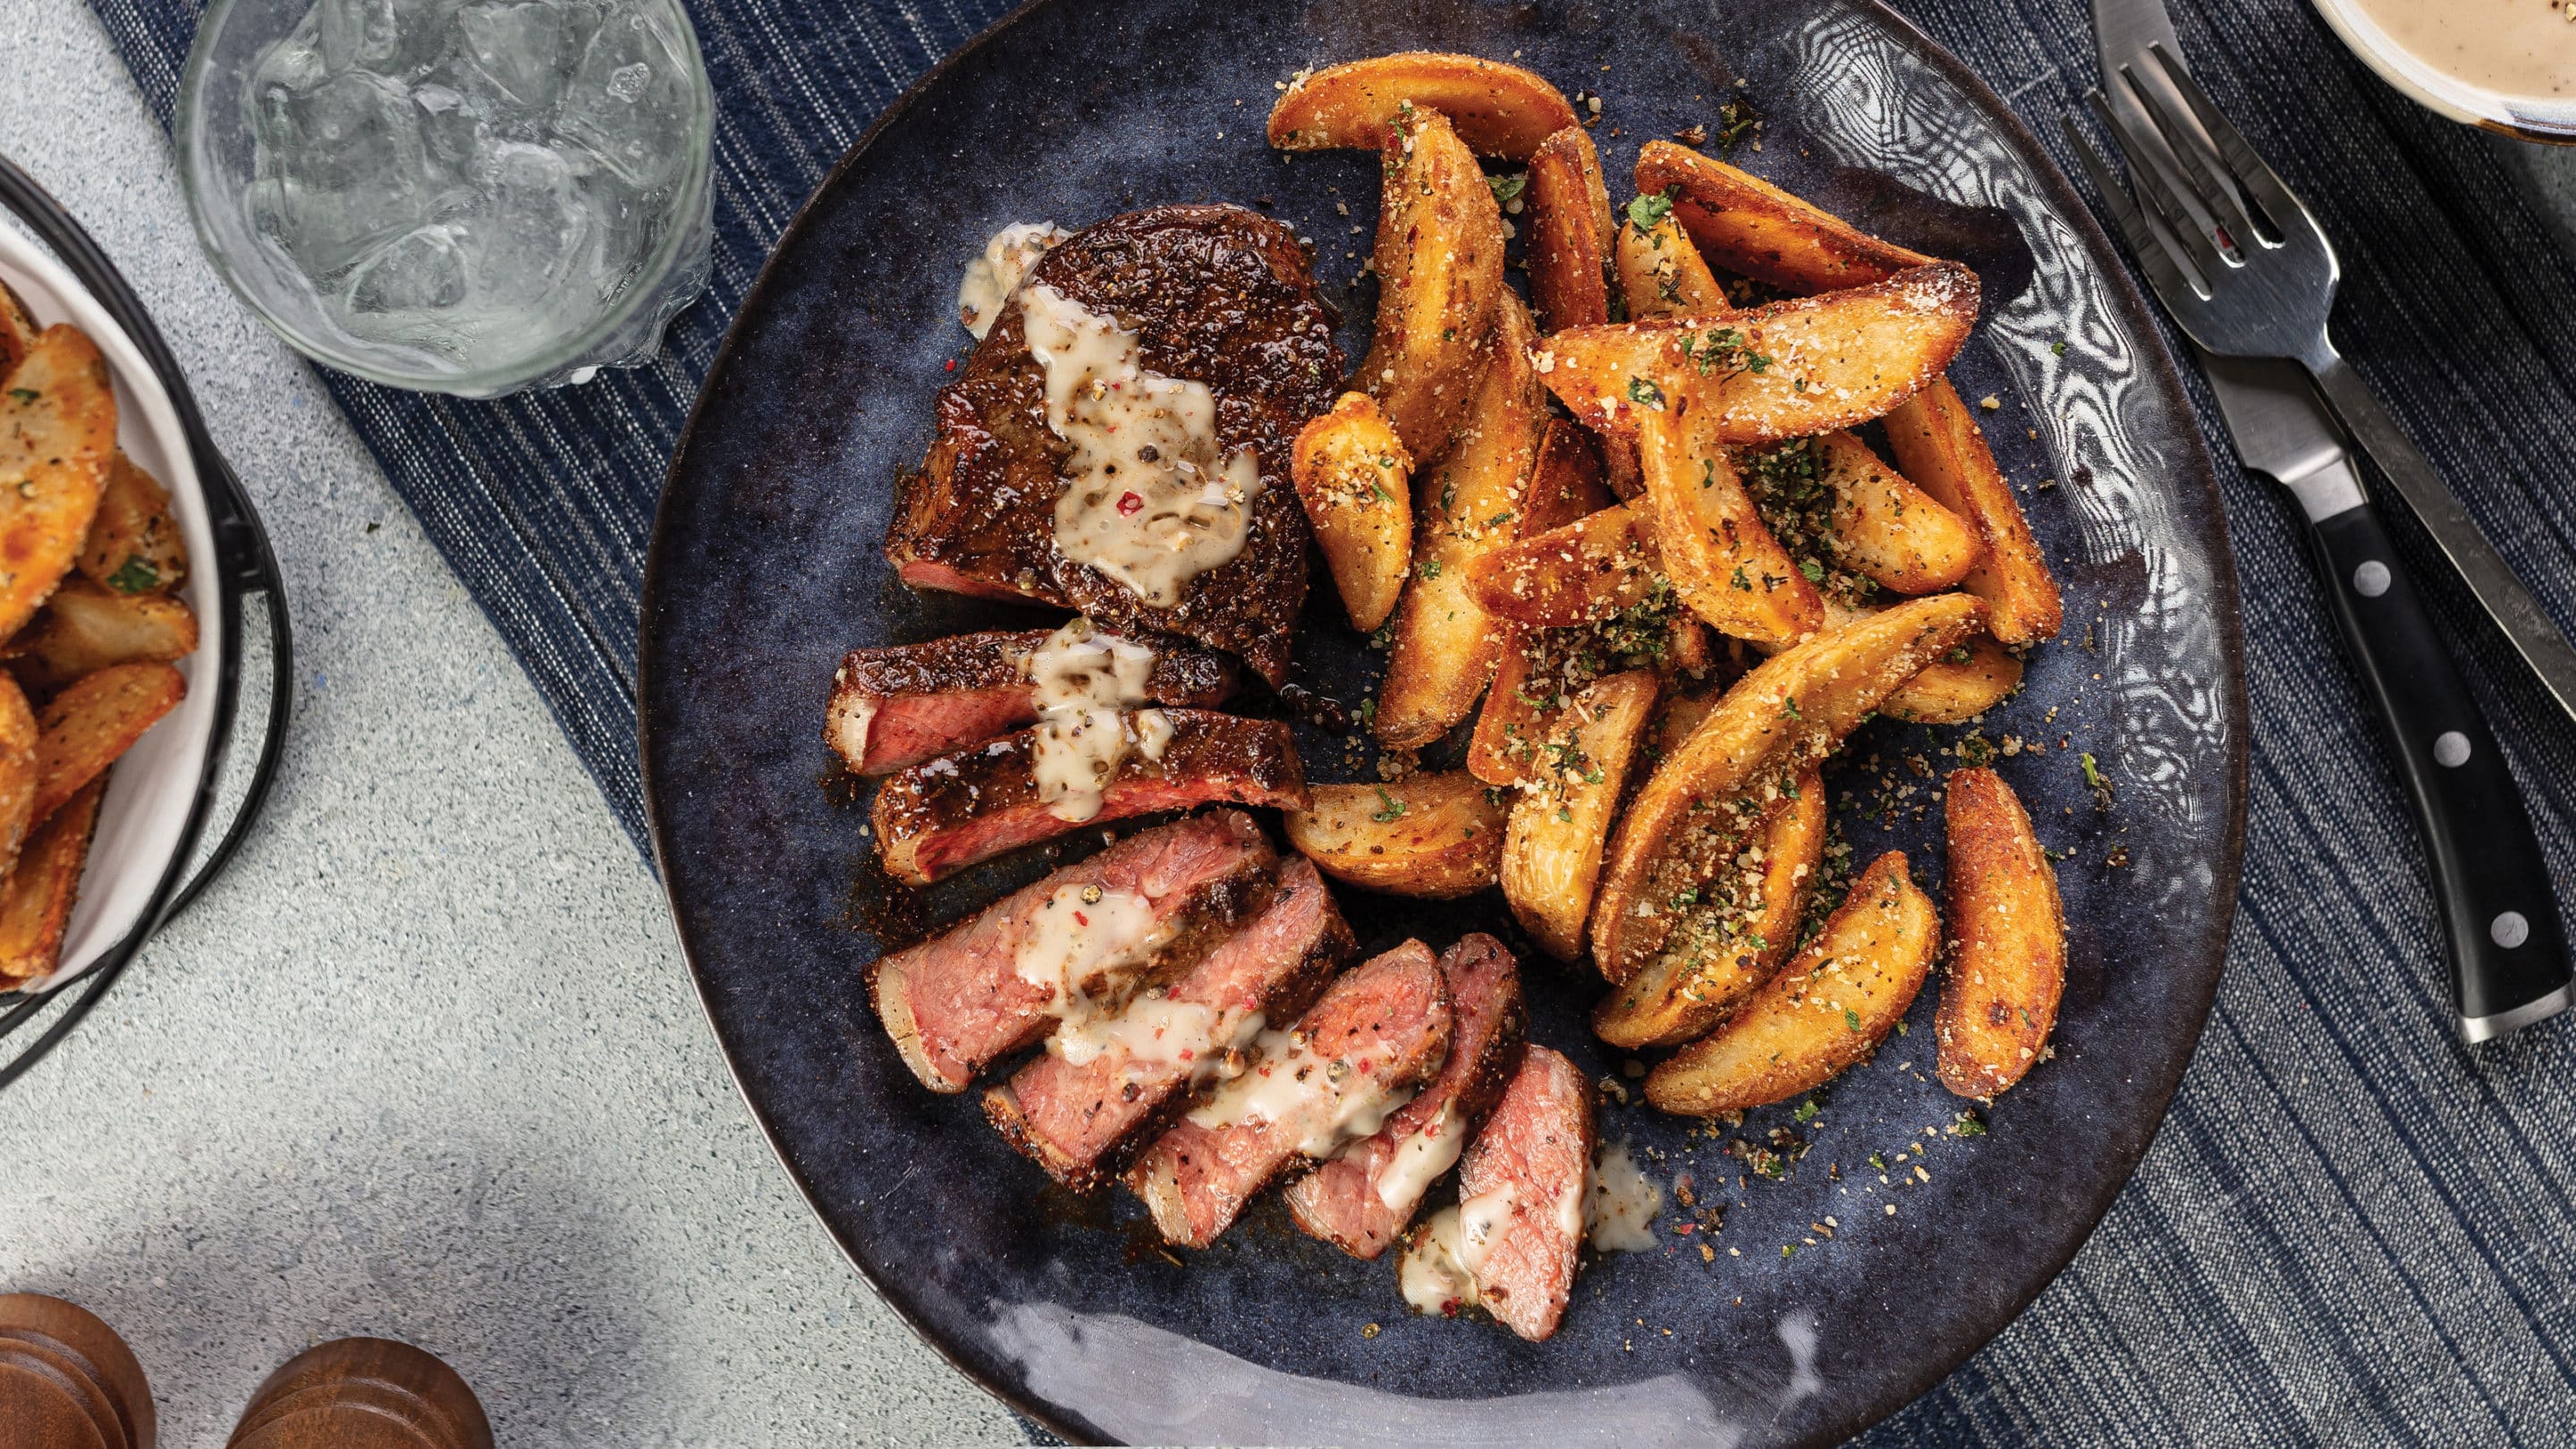 Butter-Basted Bison Ribeye Steak with Crispy Potatoes Recipe